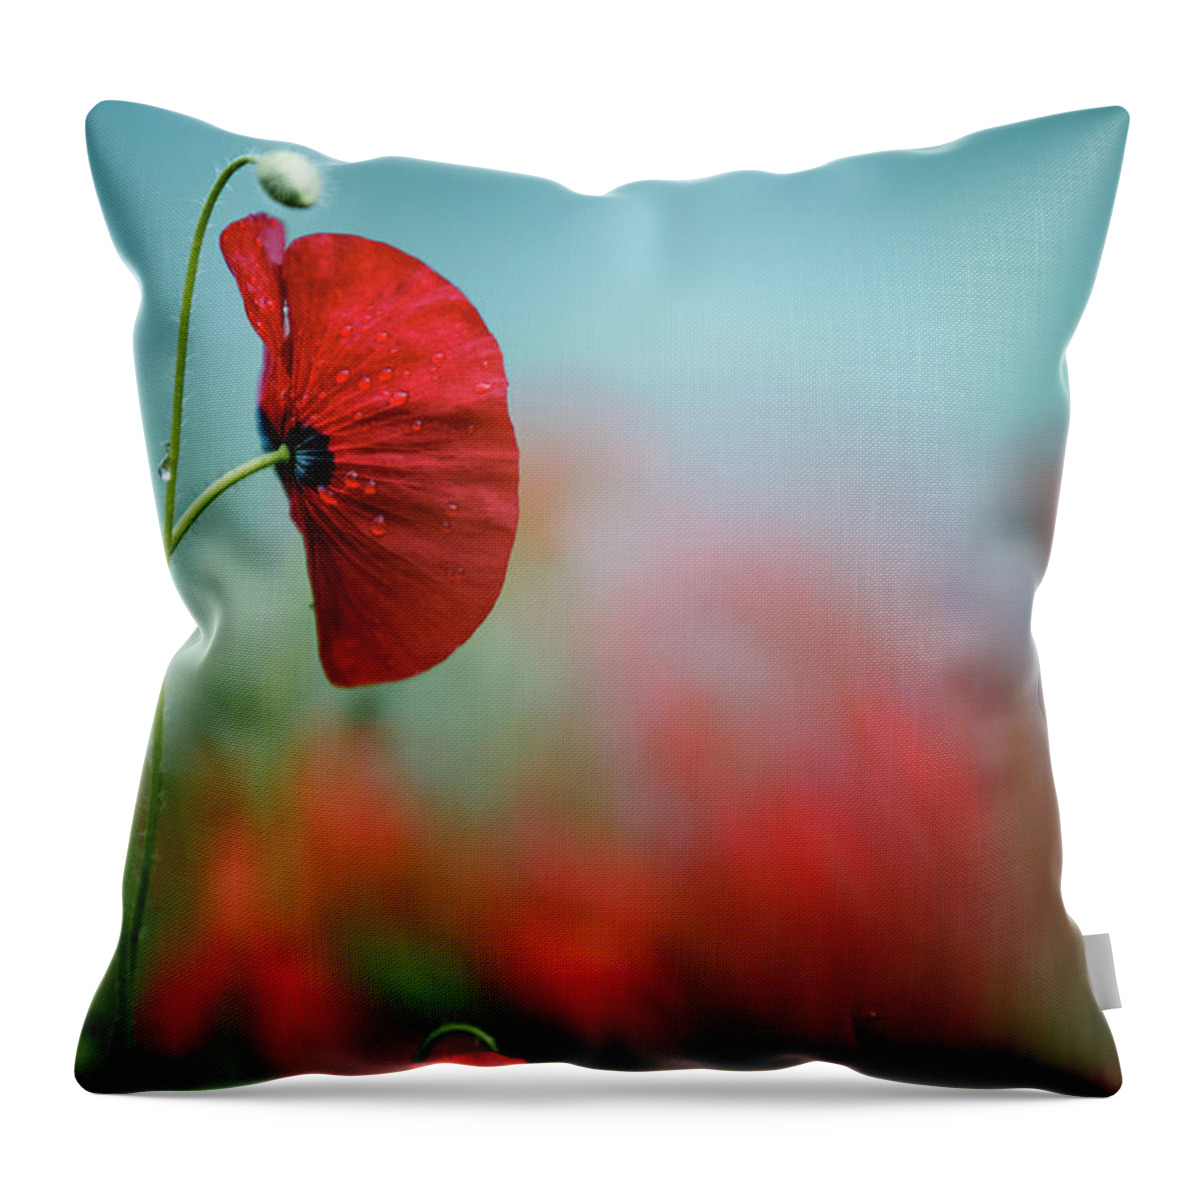 Poppy Throw Pillow featuring the photograph Red Corn Poppy Flowers #1 by Nailia Schwarz